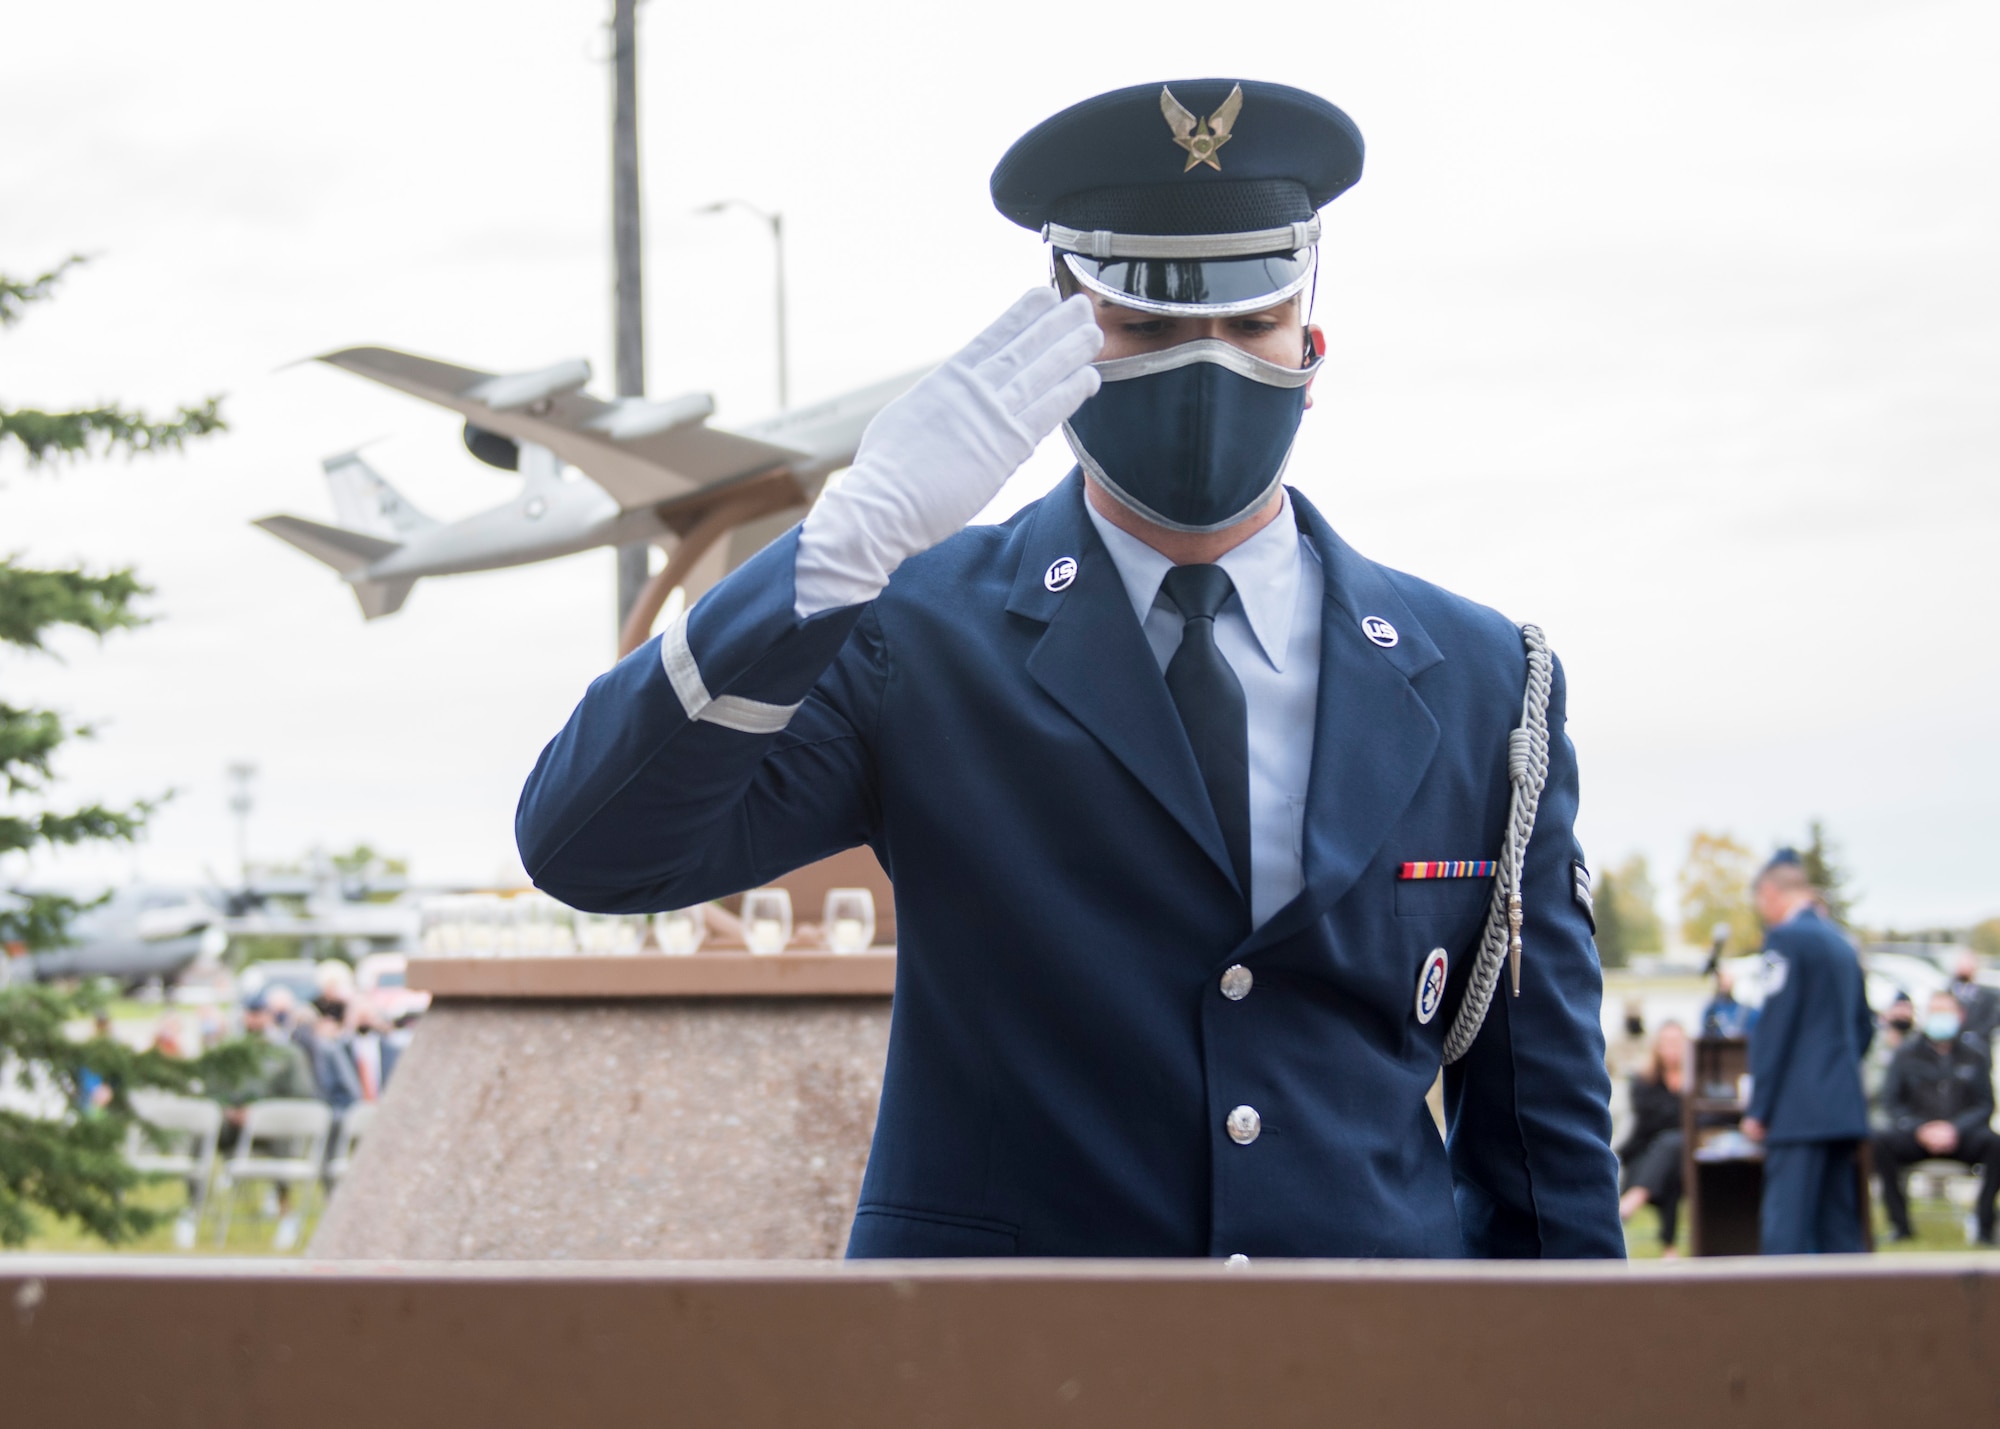 A U.S. Air Force Honor Guard member renders a salute in front of the individual memorial of one of the lost crew members at the Yukla 27 25th anniversary memorial ceremony at Joint Base Elmendorf-Richardson, Alaska, Sept. 22, 2020. Yukla 27, a U.S. Air Force E-3 Sentry airborne warning and control system aircraft assigned to the 962nd AACS, encountered a flock of geese Sept. 22, 1995, and crashed shortly after takeoff on a routine surveillance training sortie, killing all 24 Canadian and U.S. Airmen aboard.